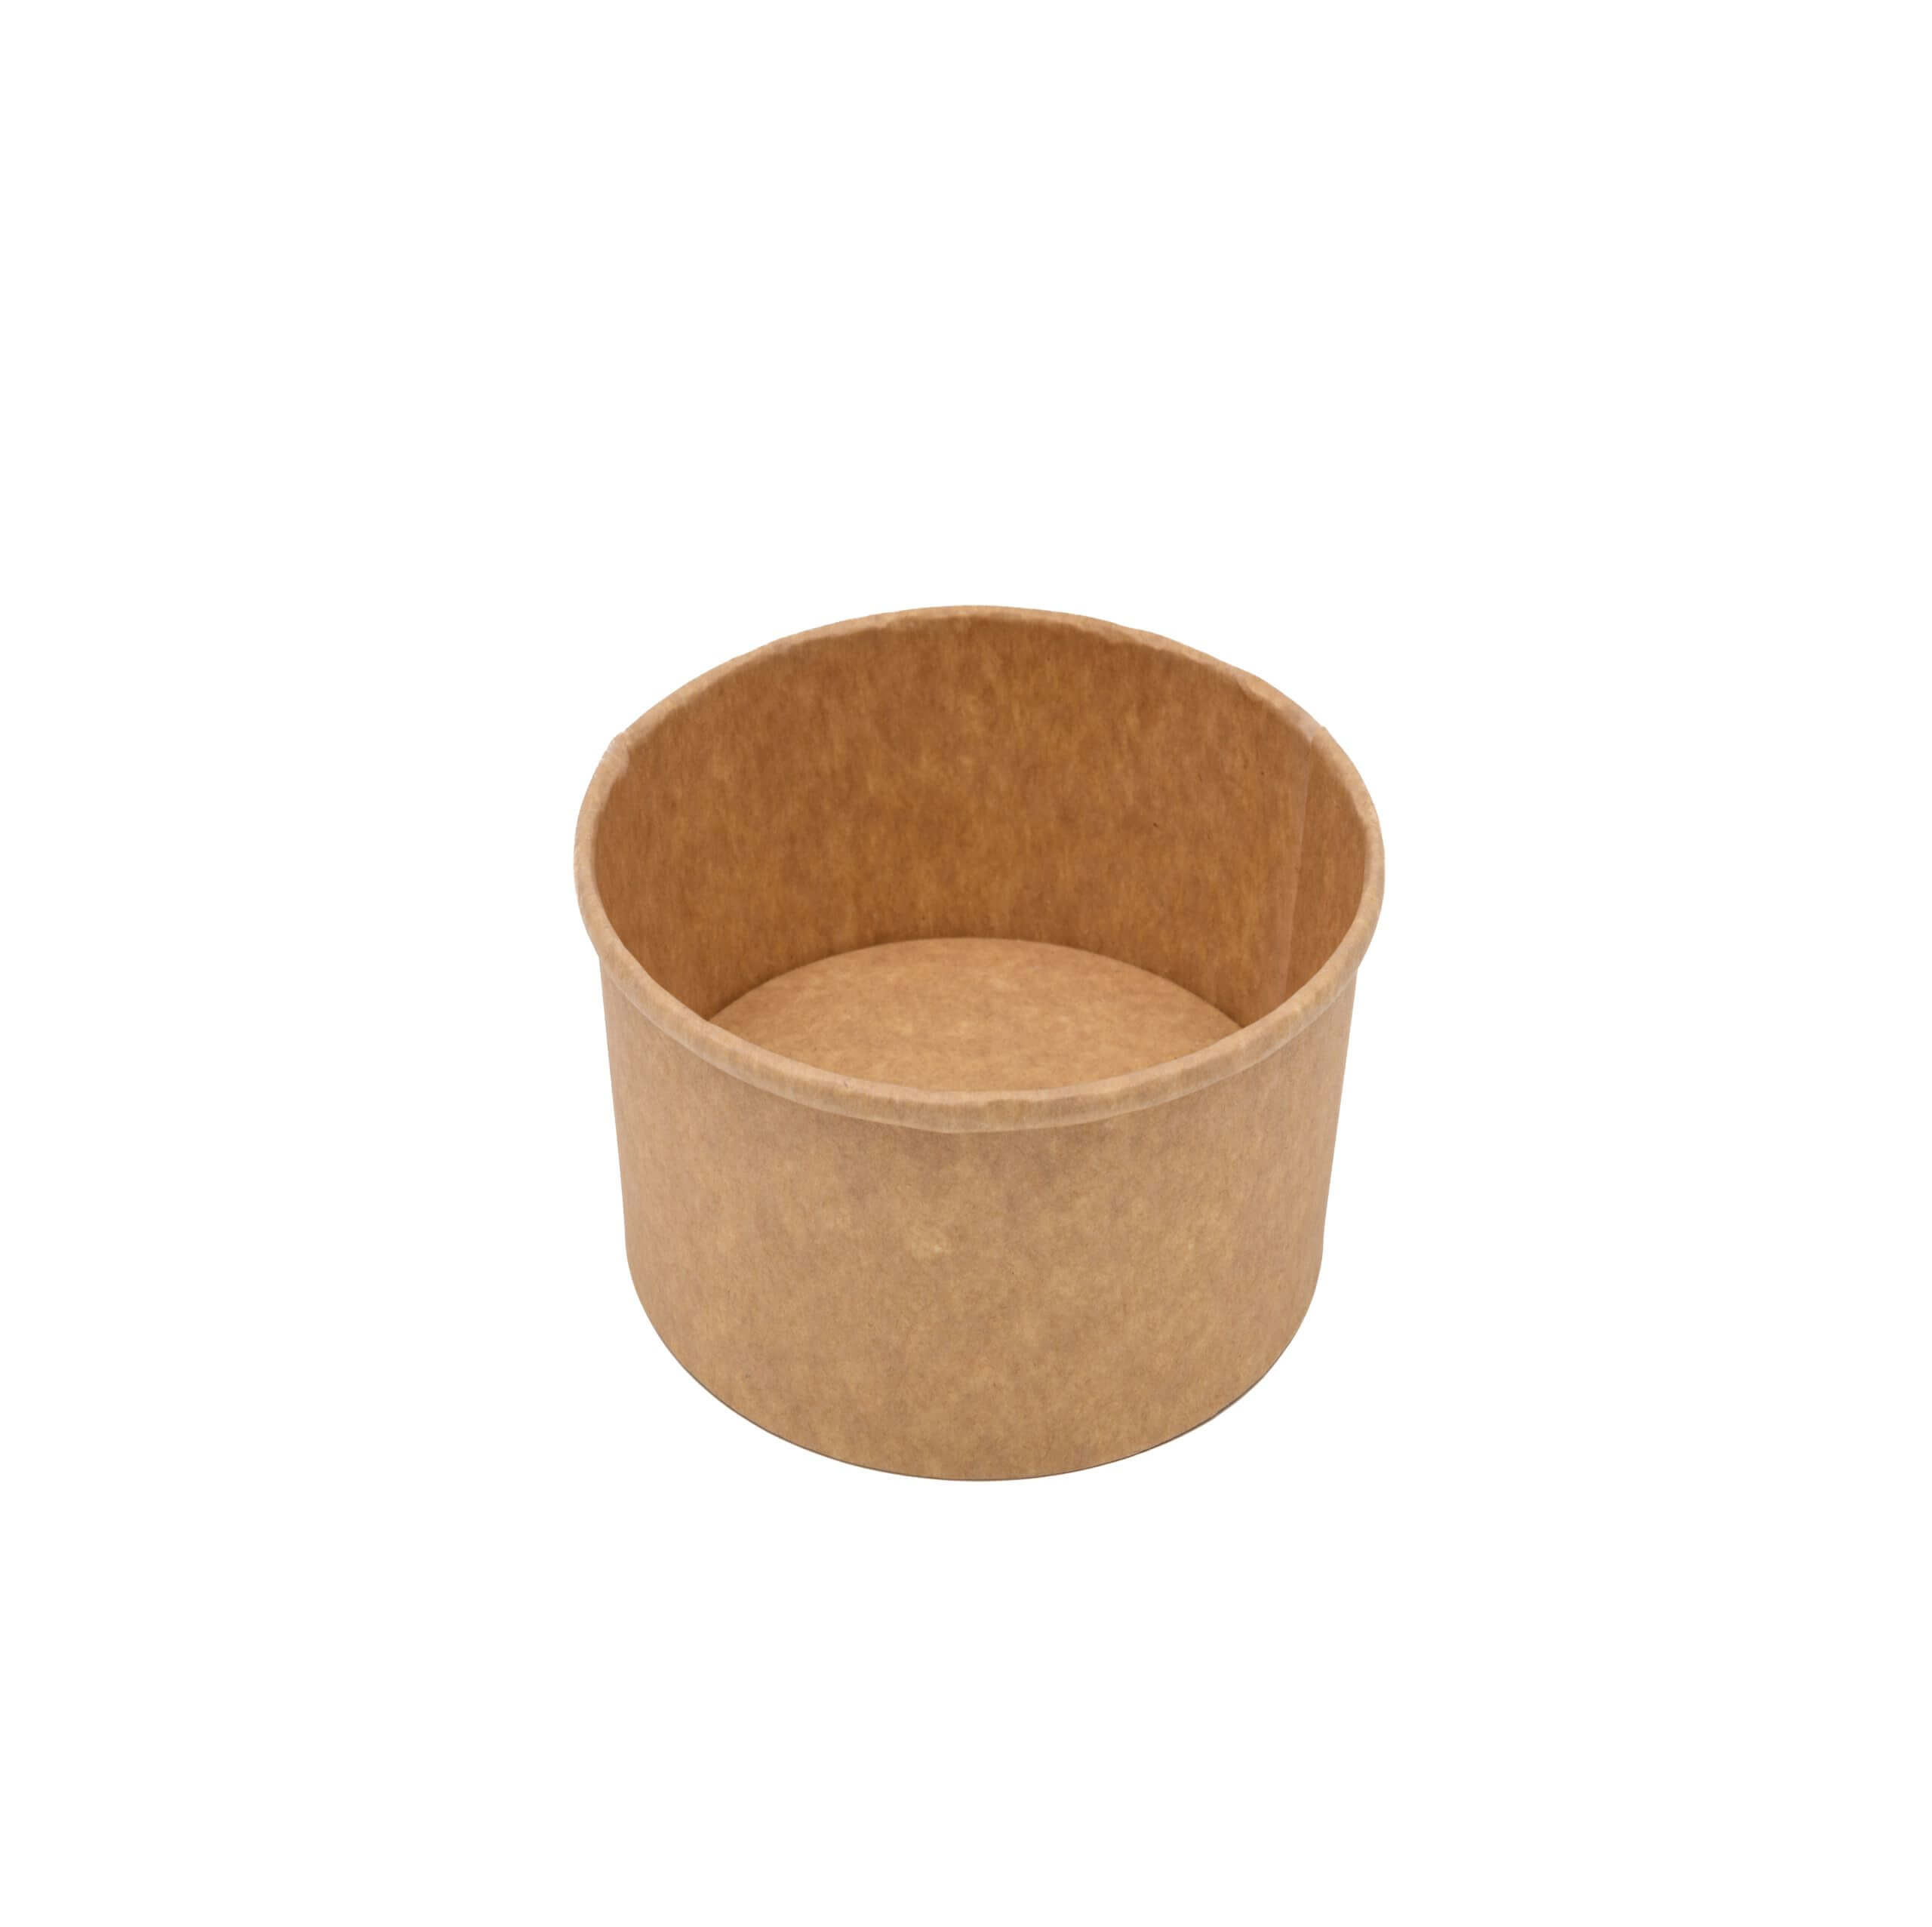 An image of one of our Takeaway Paper Bowls.